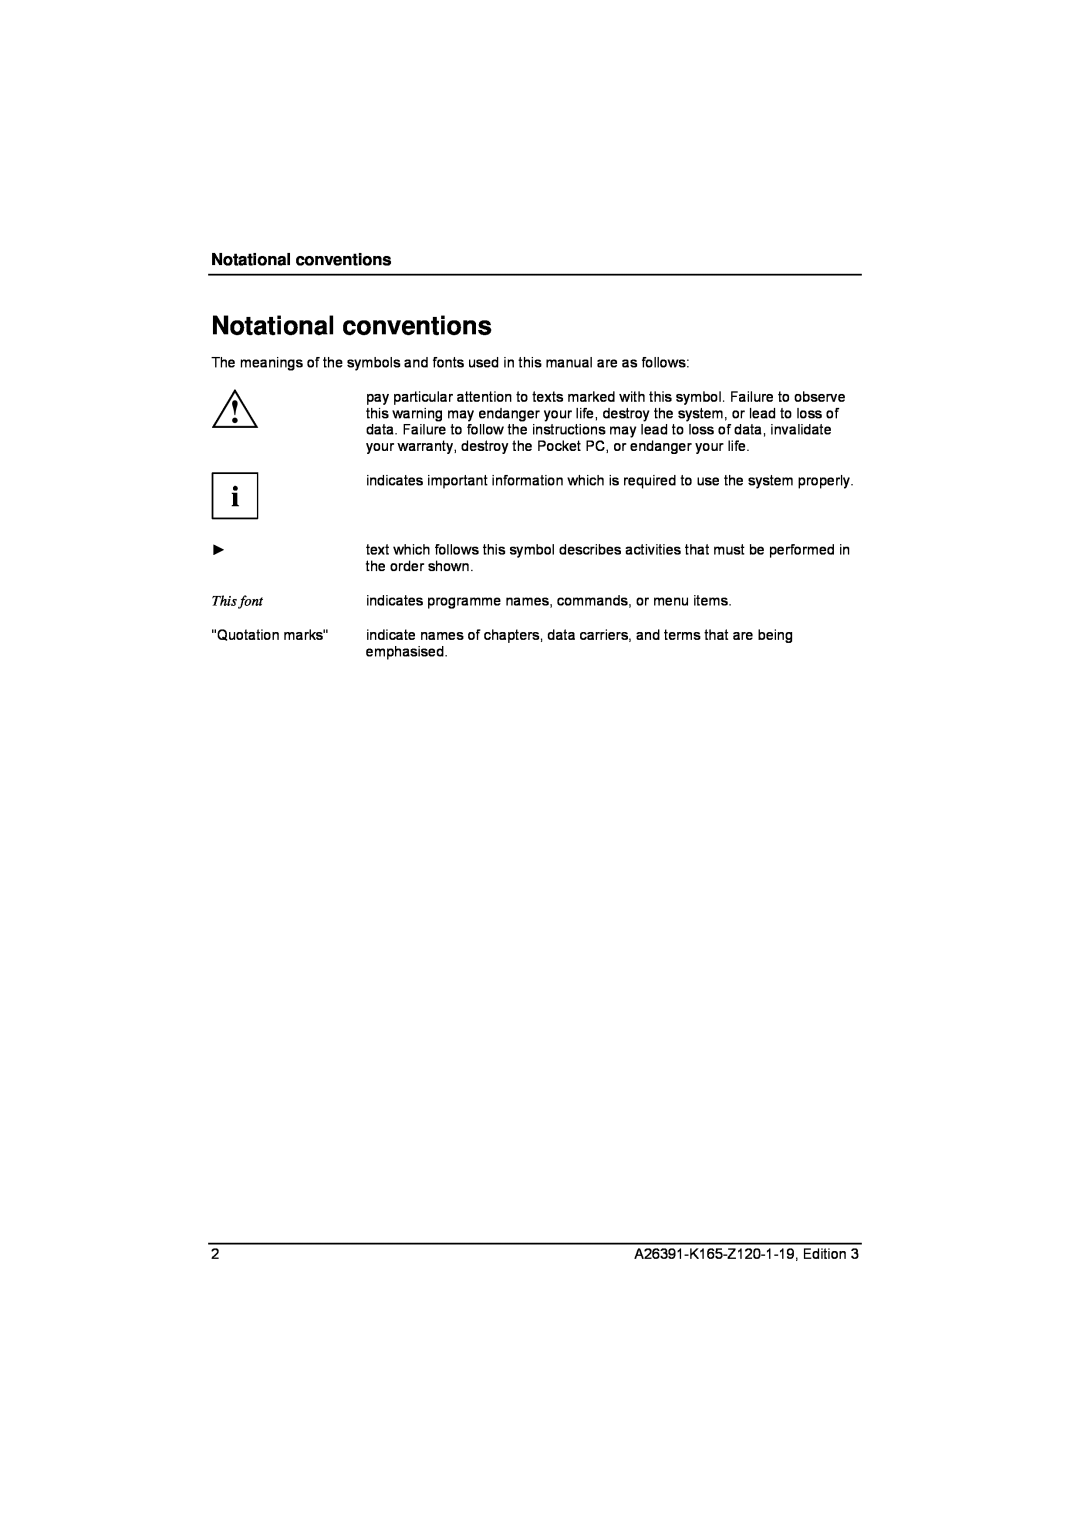 Zweita  Co N/C Series manual Notational conventions 